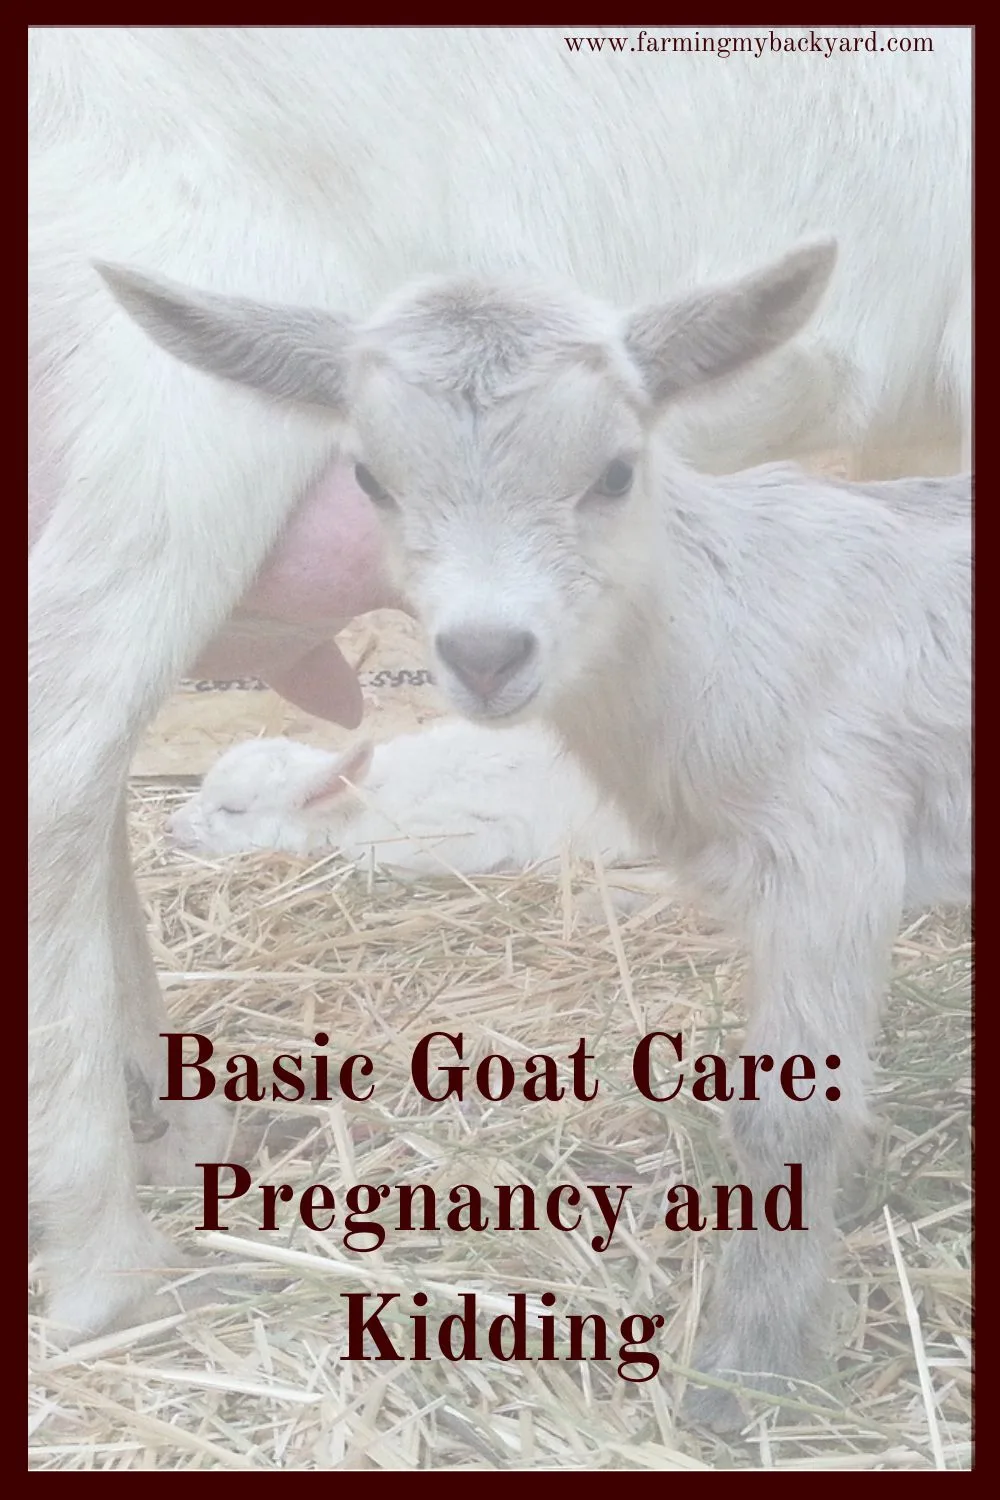 Kidding can be an exciting time for goat owners. Make sure you are prepared with what you need to know as well as have the right supplies.